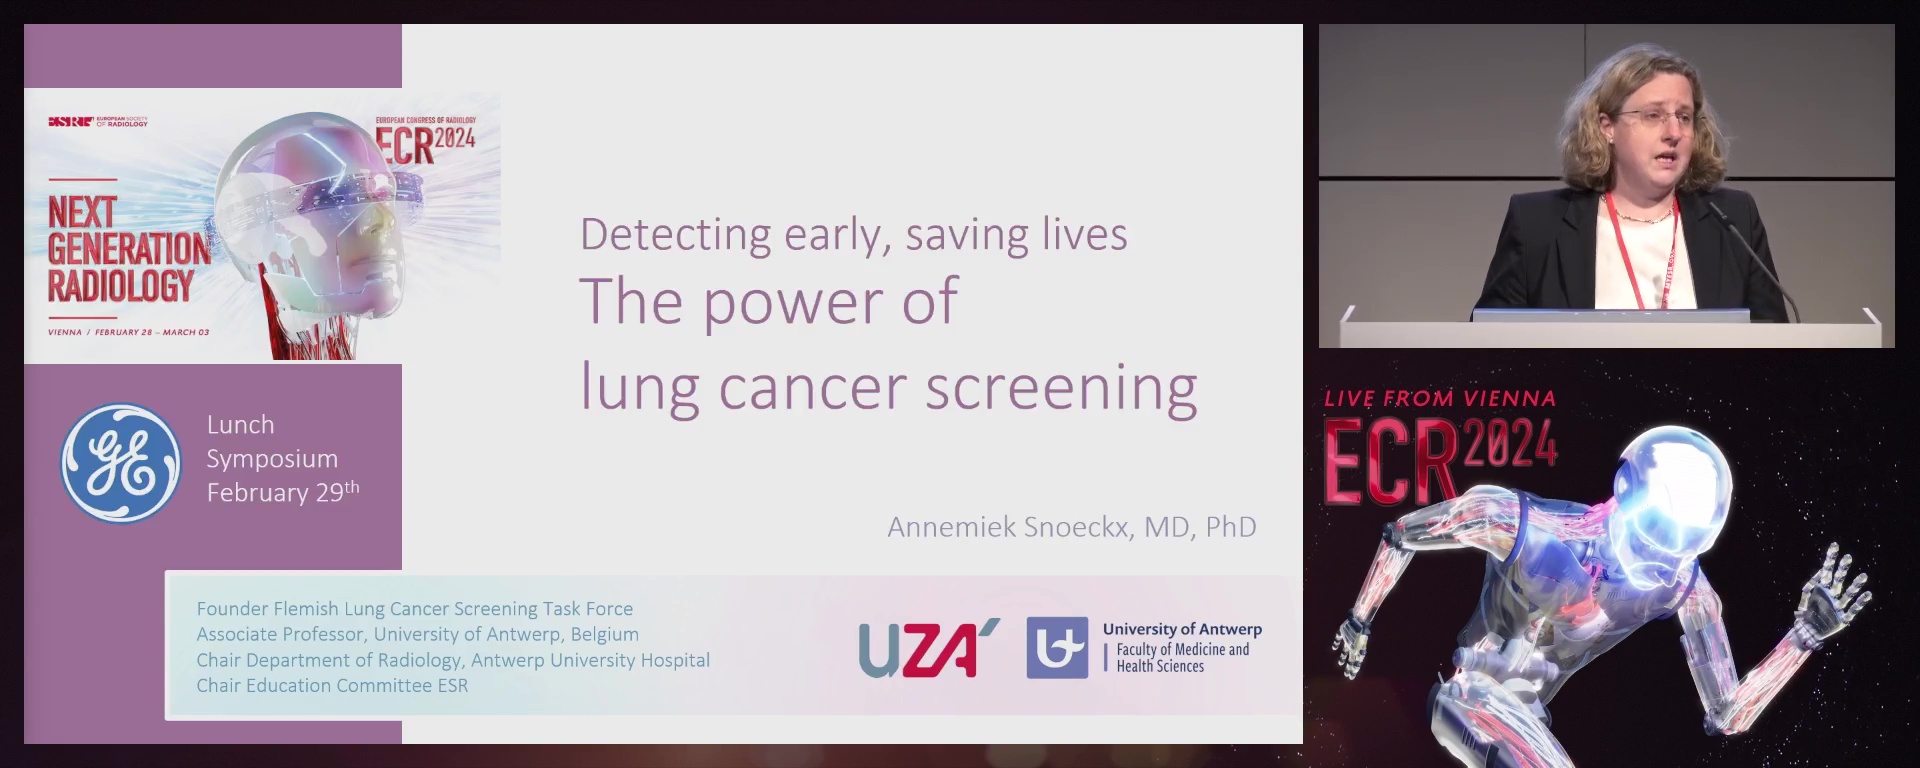 Detecting early, saving lives: the power of lung cancer screening.